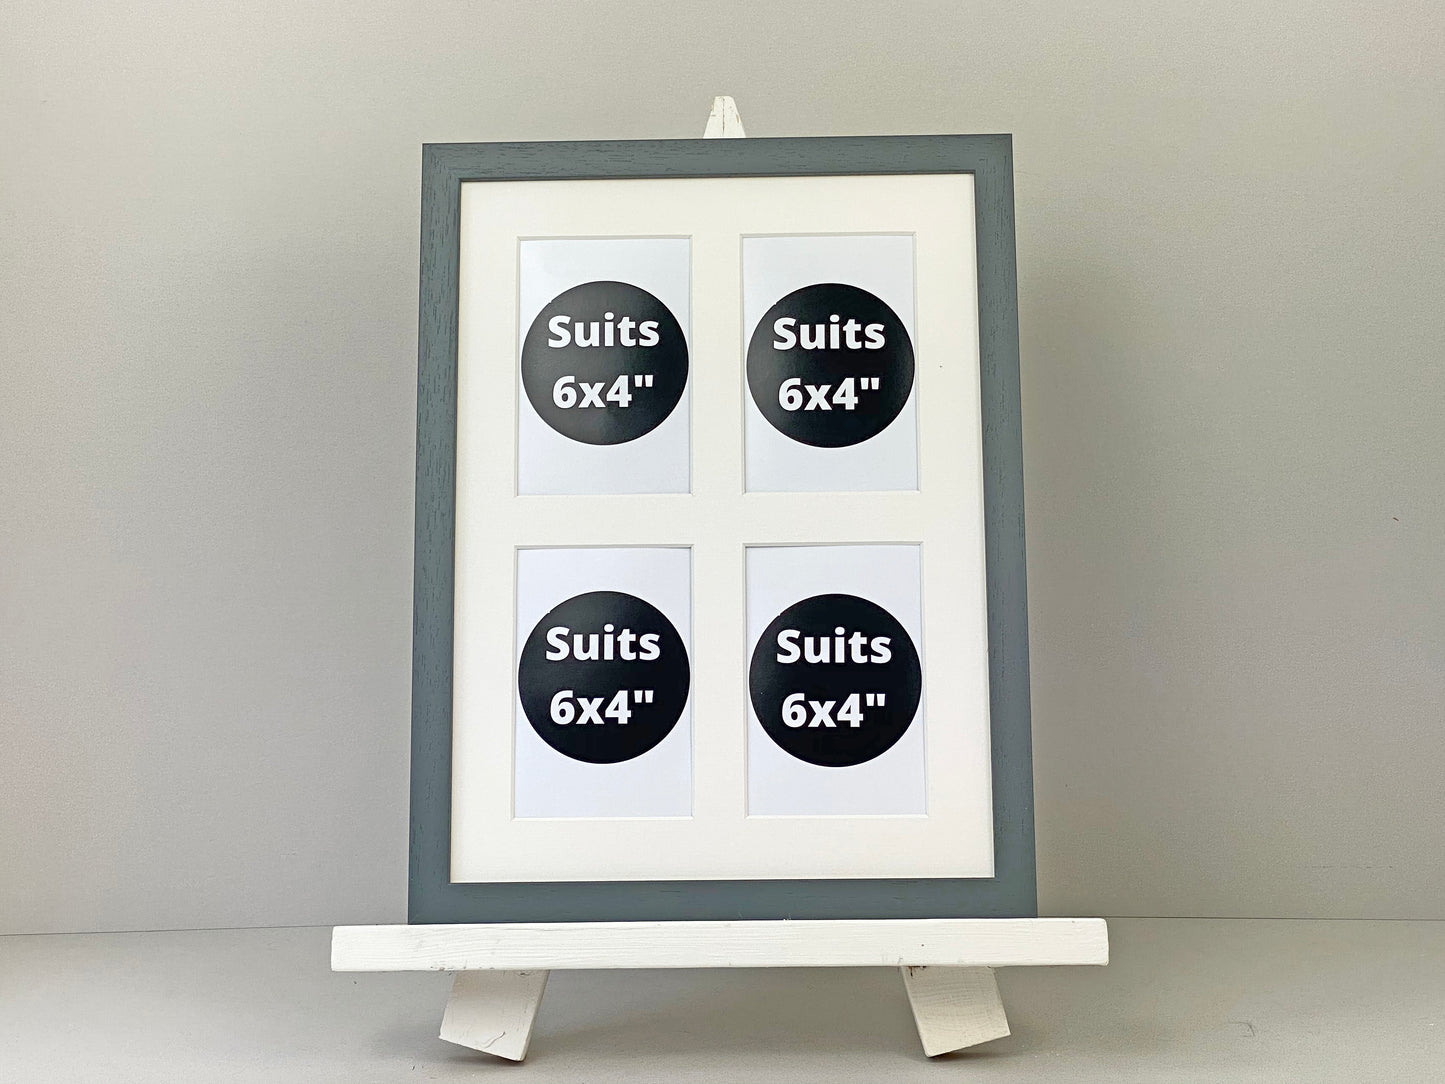 Suits Four 6x4" photos. 30x40cm. Wooden Collage Picture Frame.